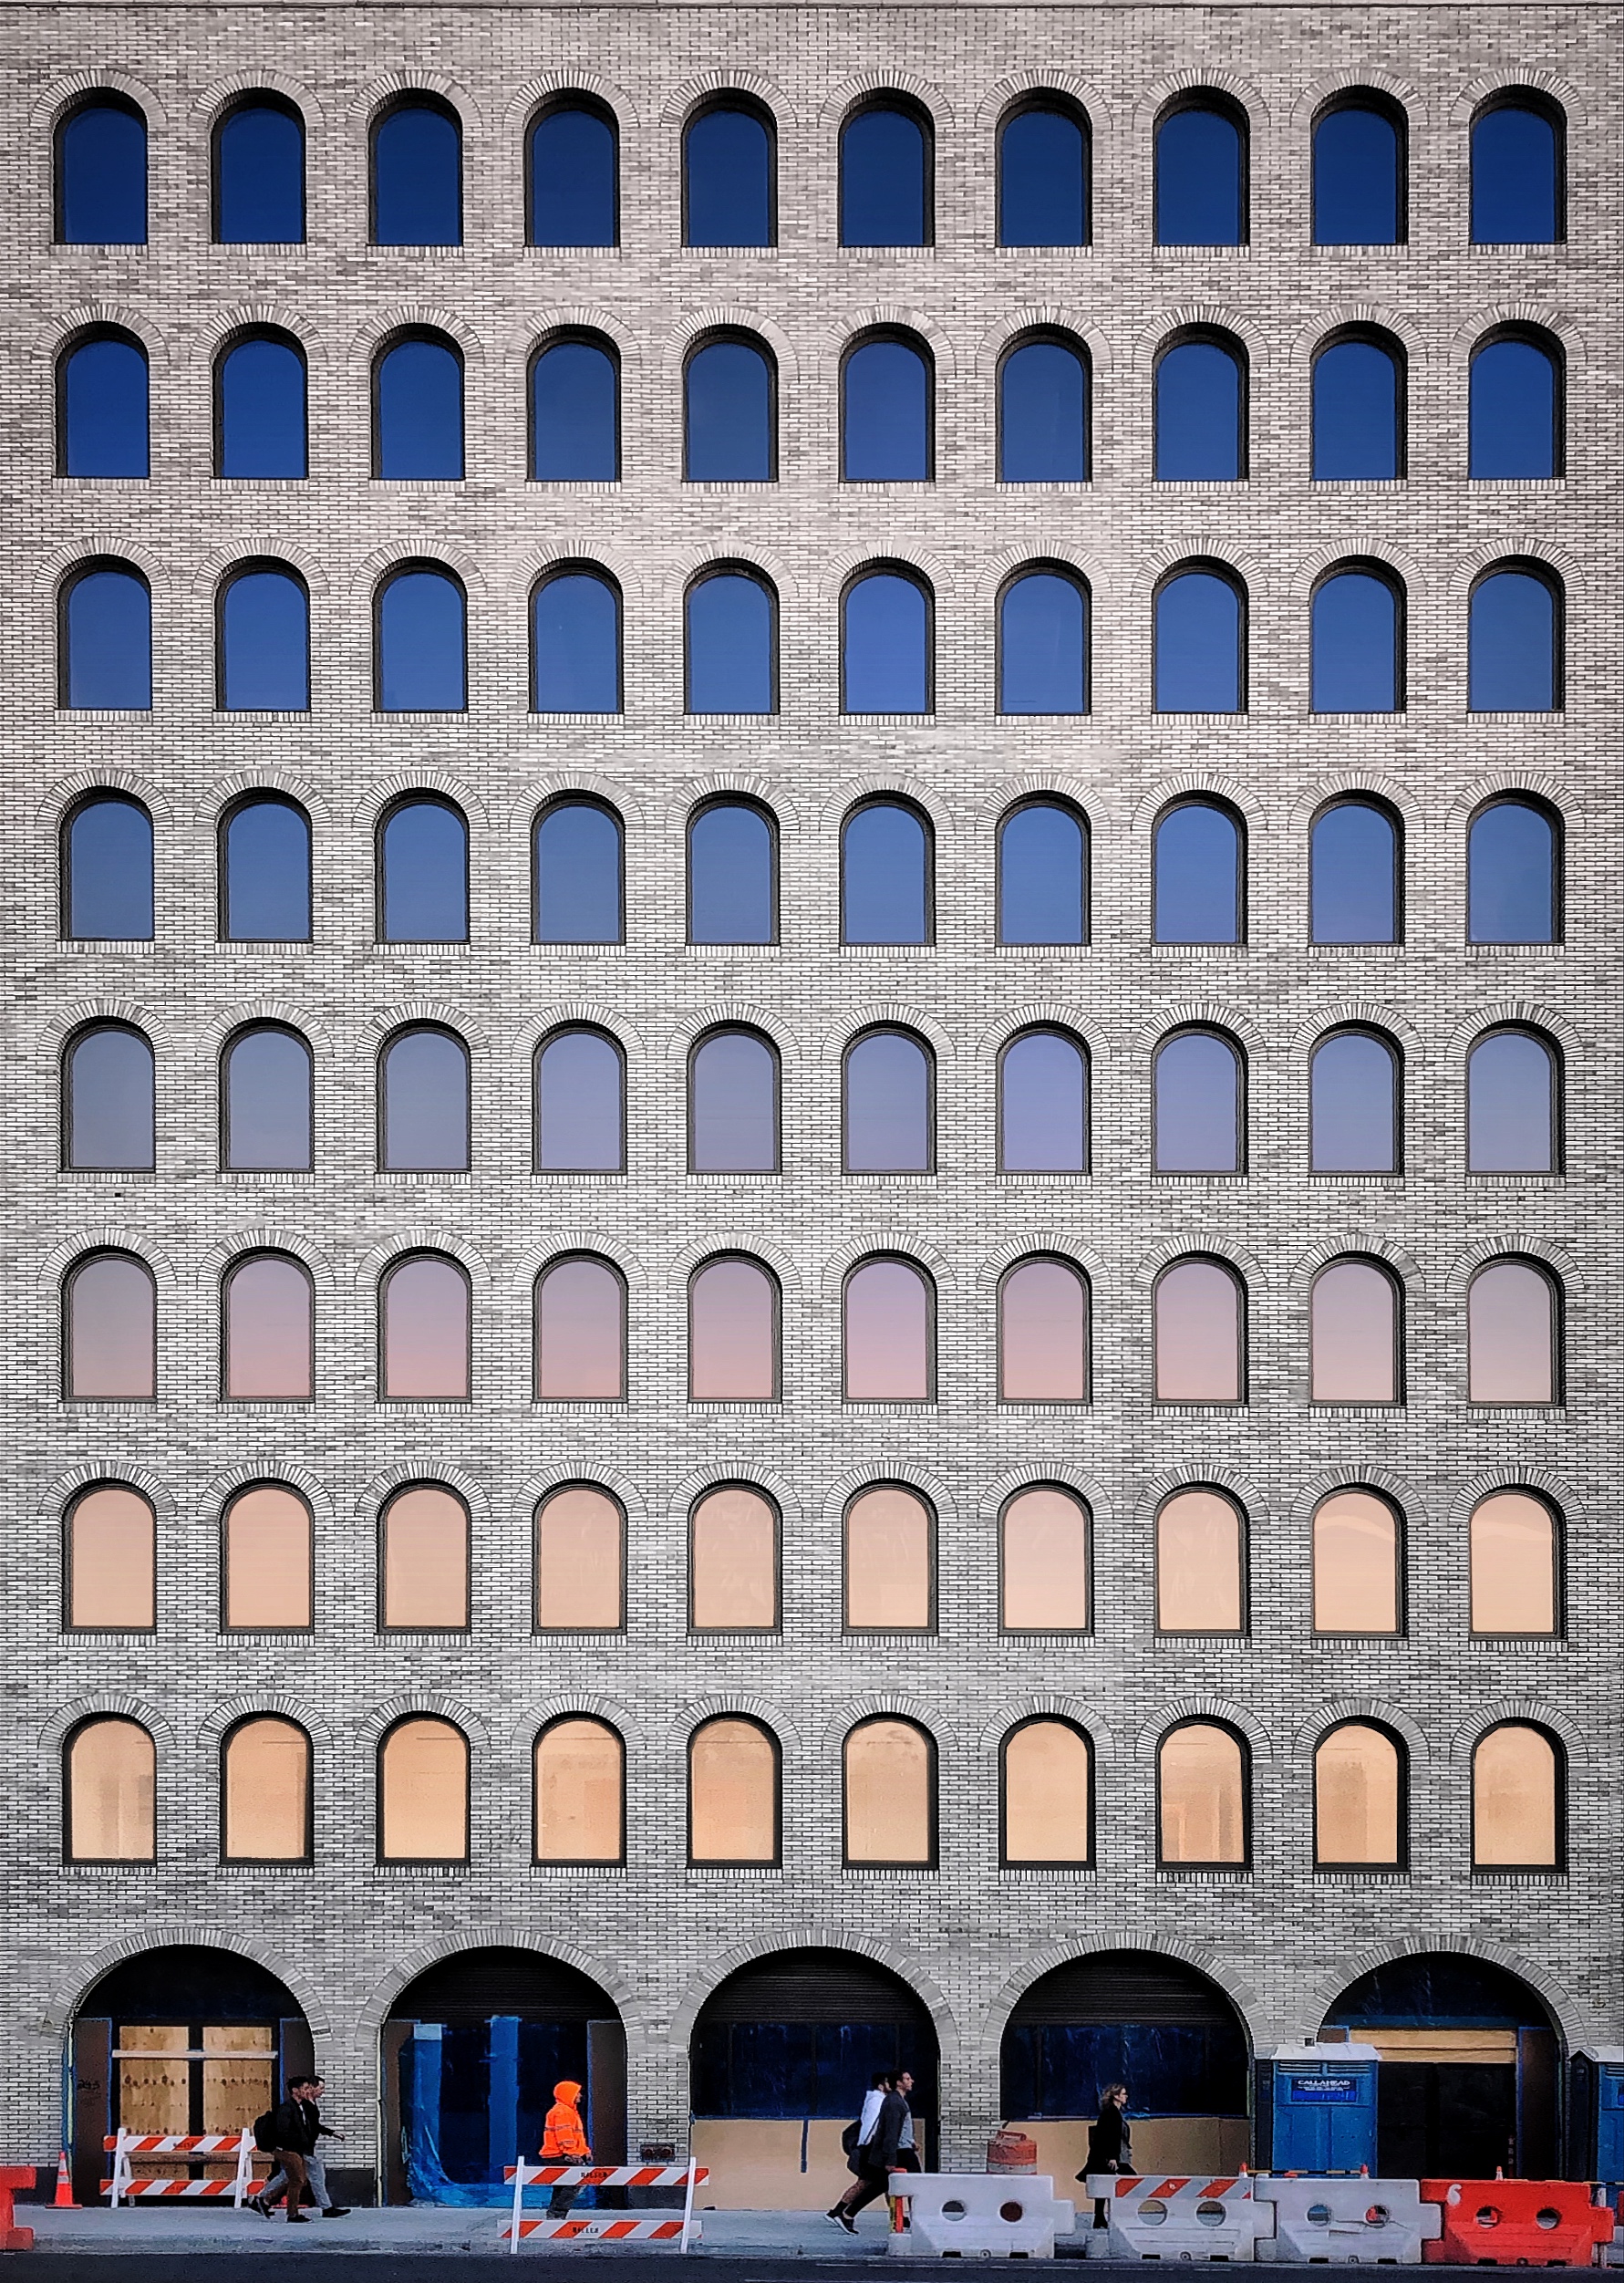 7 Ways Architectural Photographers are Elevating and Complicating the Modern Façade